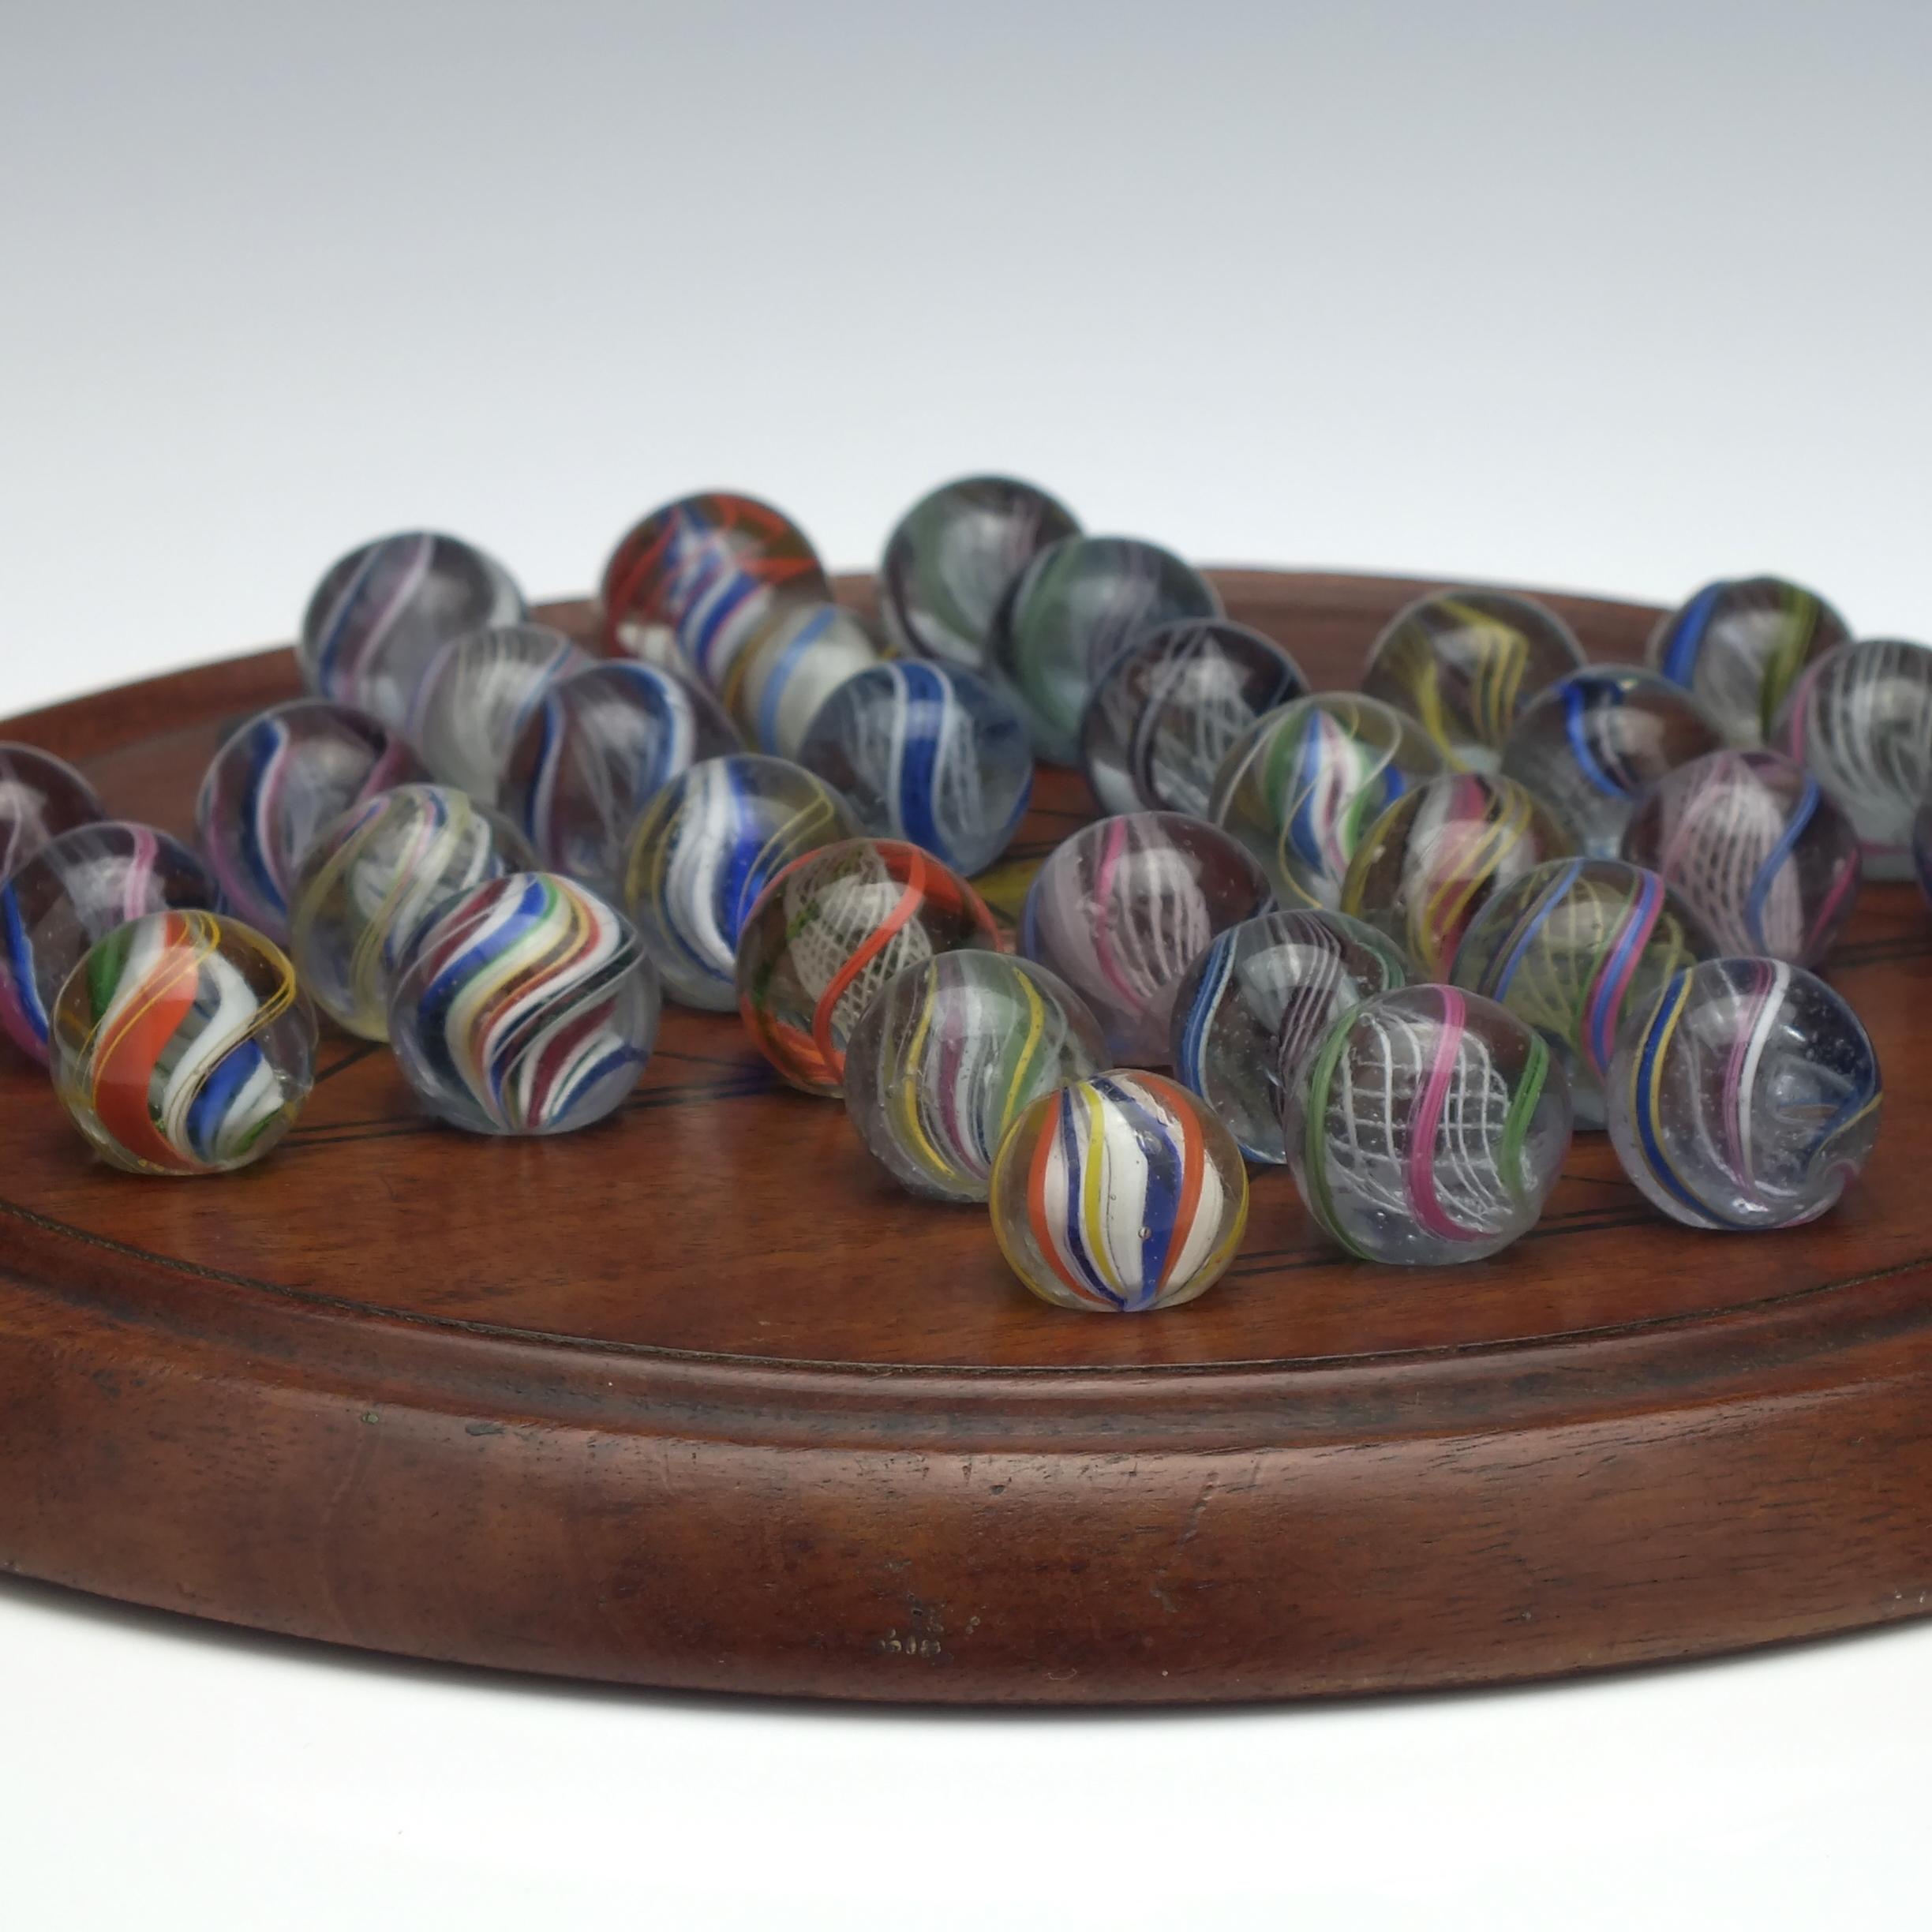 Victorian Antique Solitaire Board and 19th Century German Marbles, circa 1870